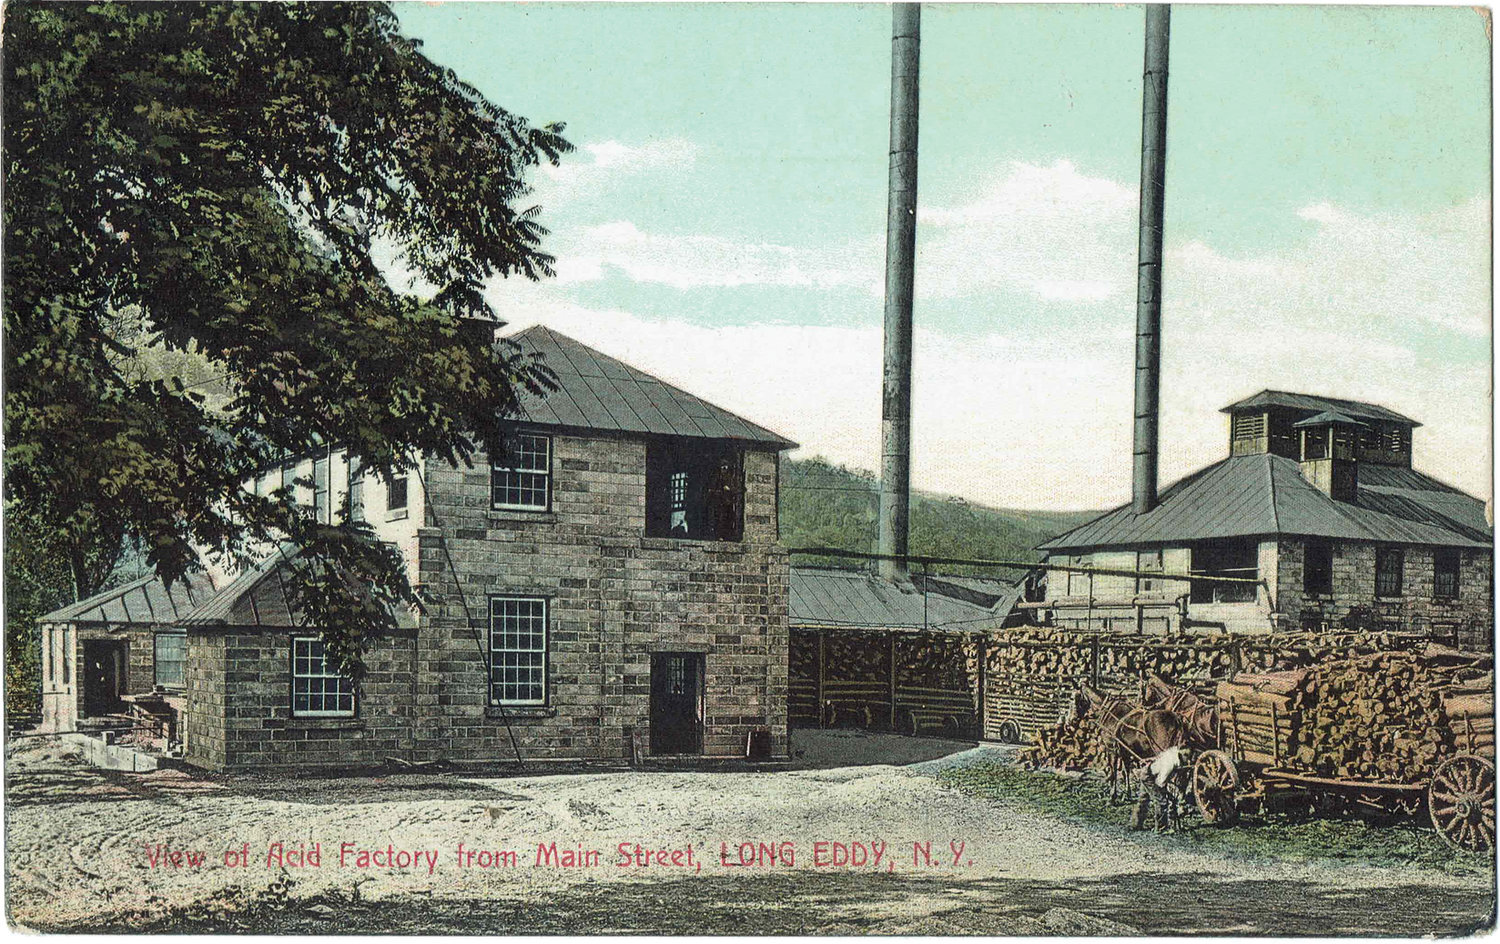 Powerful waters: As mentioned in this week's Decades, the rains of 1942 had a disastrous effect on Long Eddy, and areas of nearby Pennsylvania. While we don’t have vintage photos of the flood available, the above postcard shows the Long Eddy acid factory which was said to have suffered some damage from the rising waters. The consequences of this flood of 80 years ago was felt for a long time as it displaced houses and even the Erie Railroad. Honesdale, Pa. was among the hardest hit, with at least 15 people who lost their lives, in addition to damage to houses and businesses.